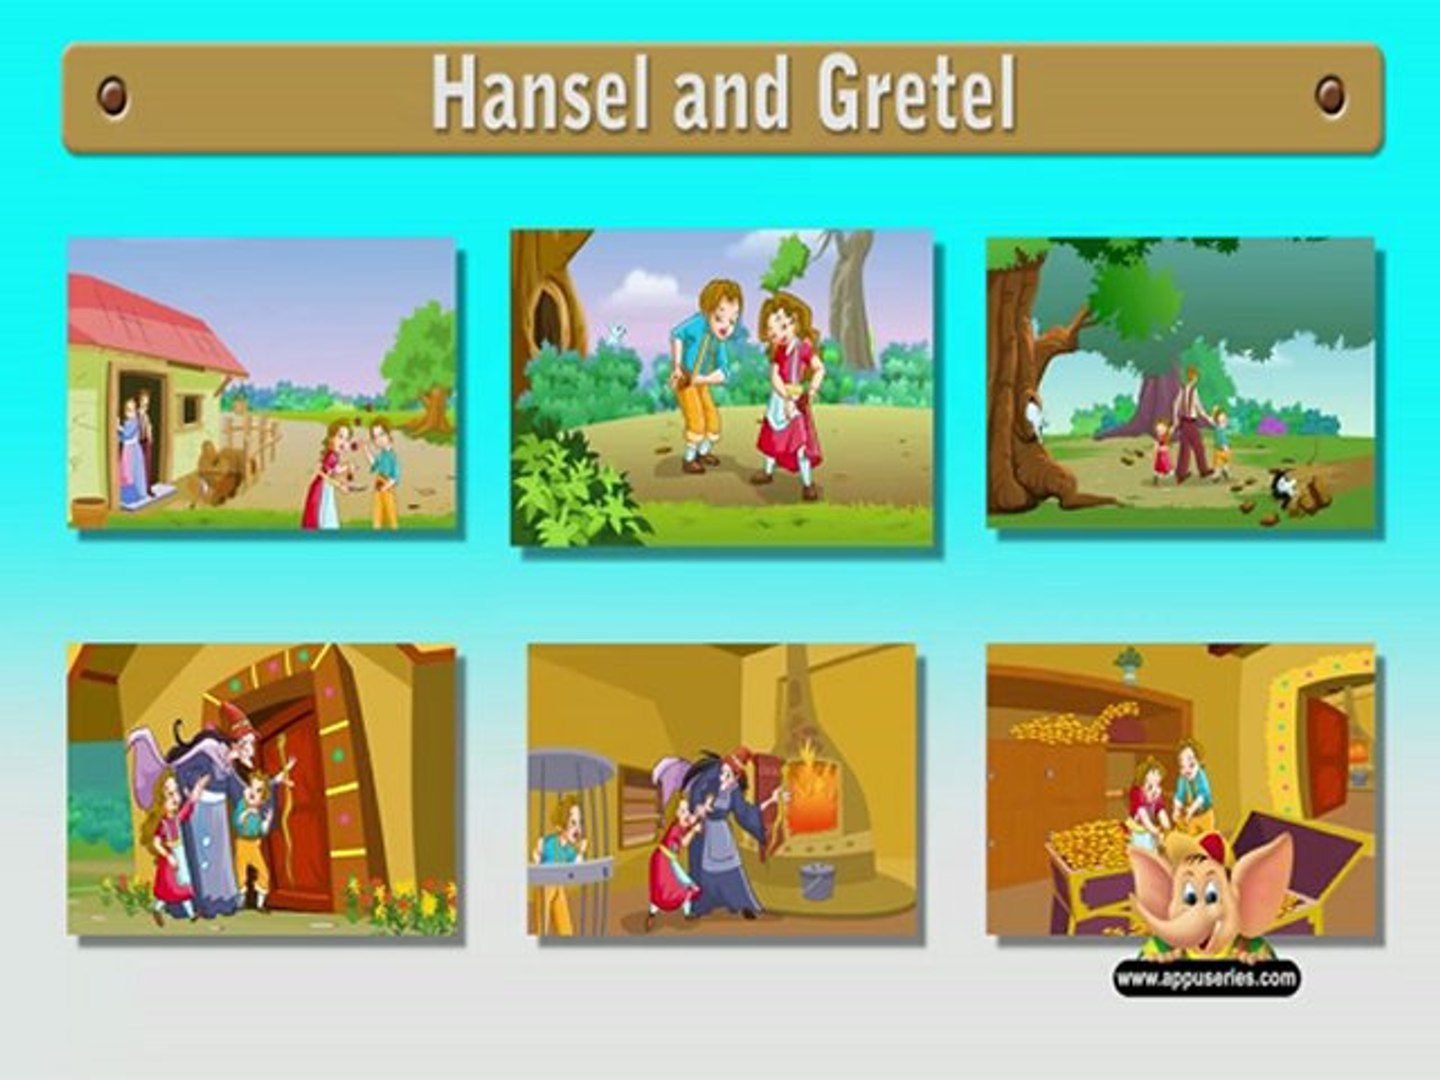 Hansel and Gretel - A Short Story - video Dailymotion